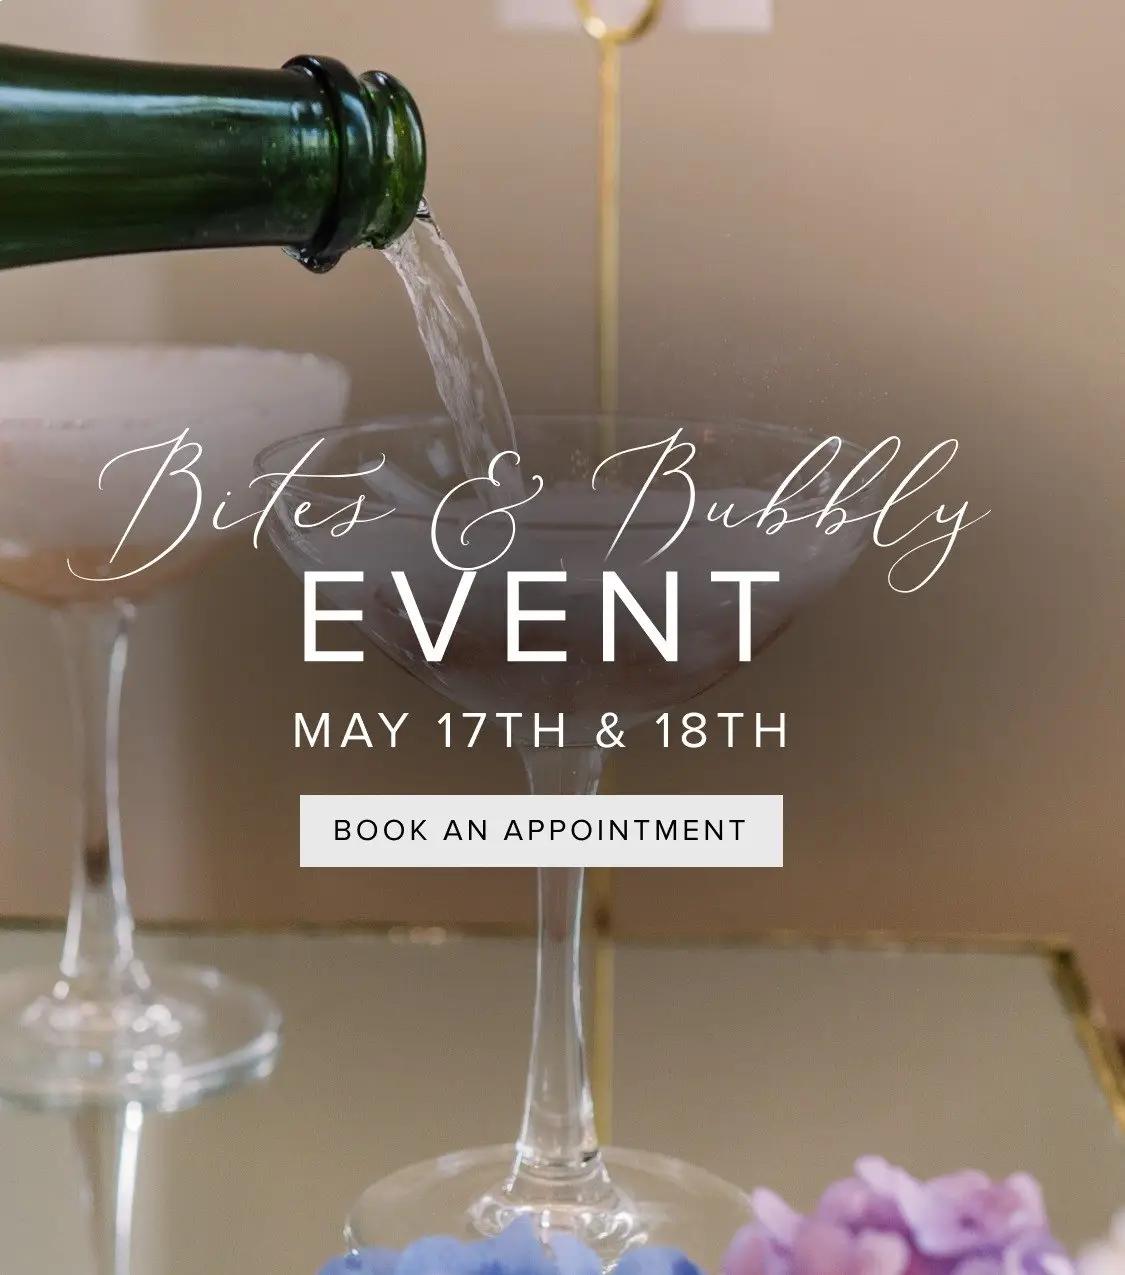 Bites & Bubbly Weekend event